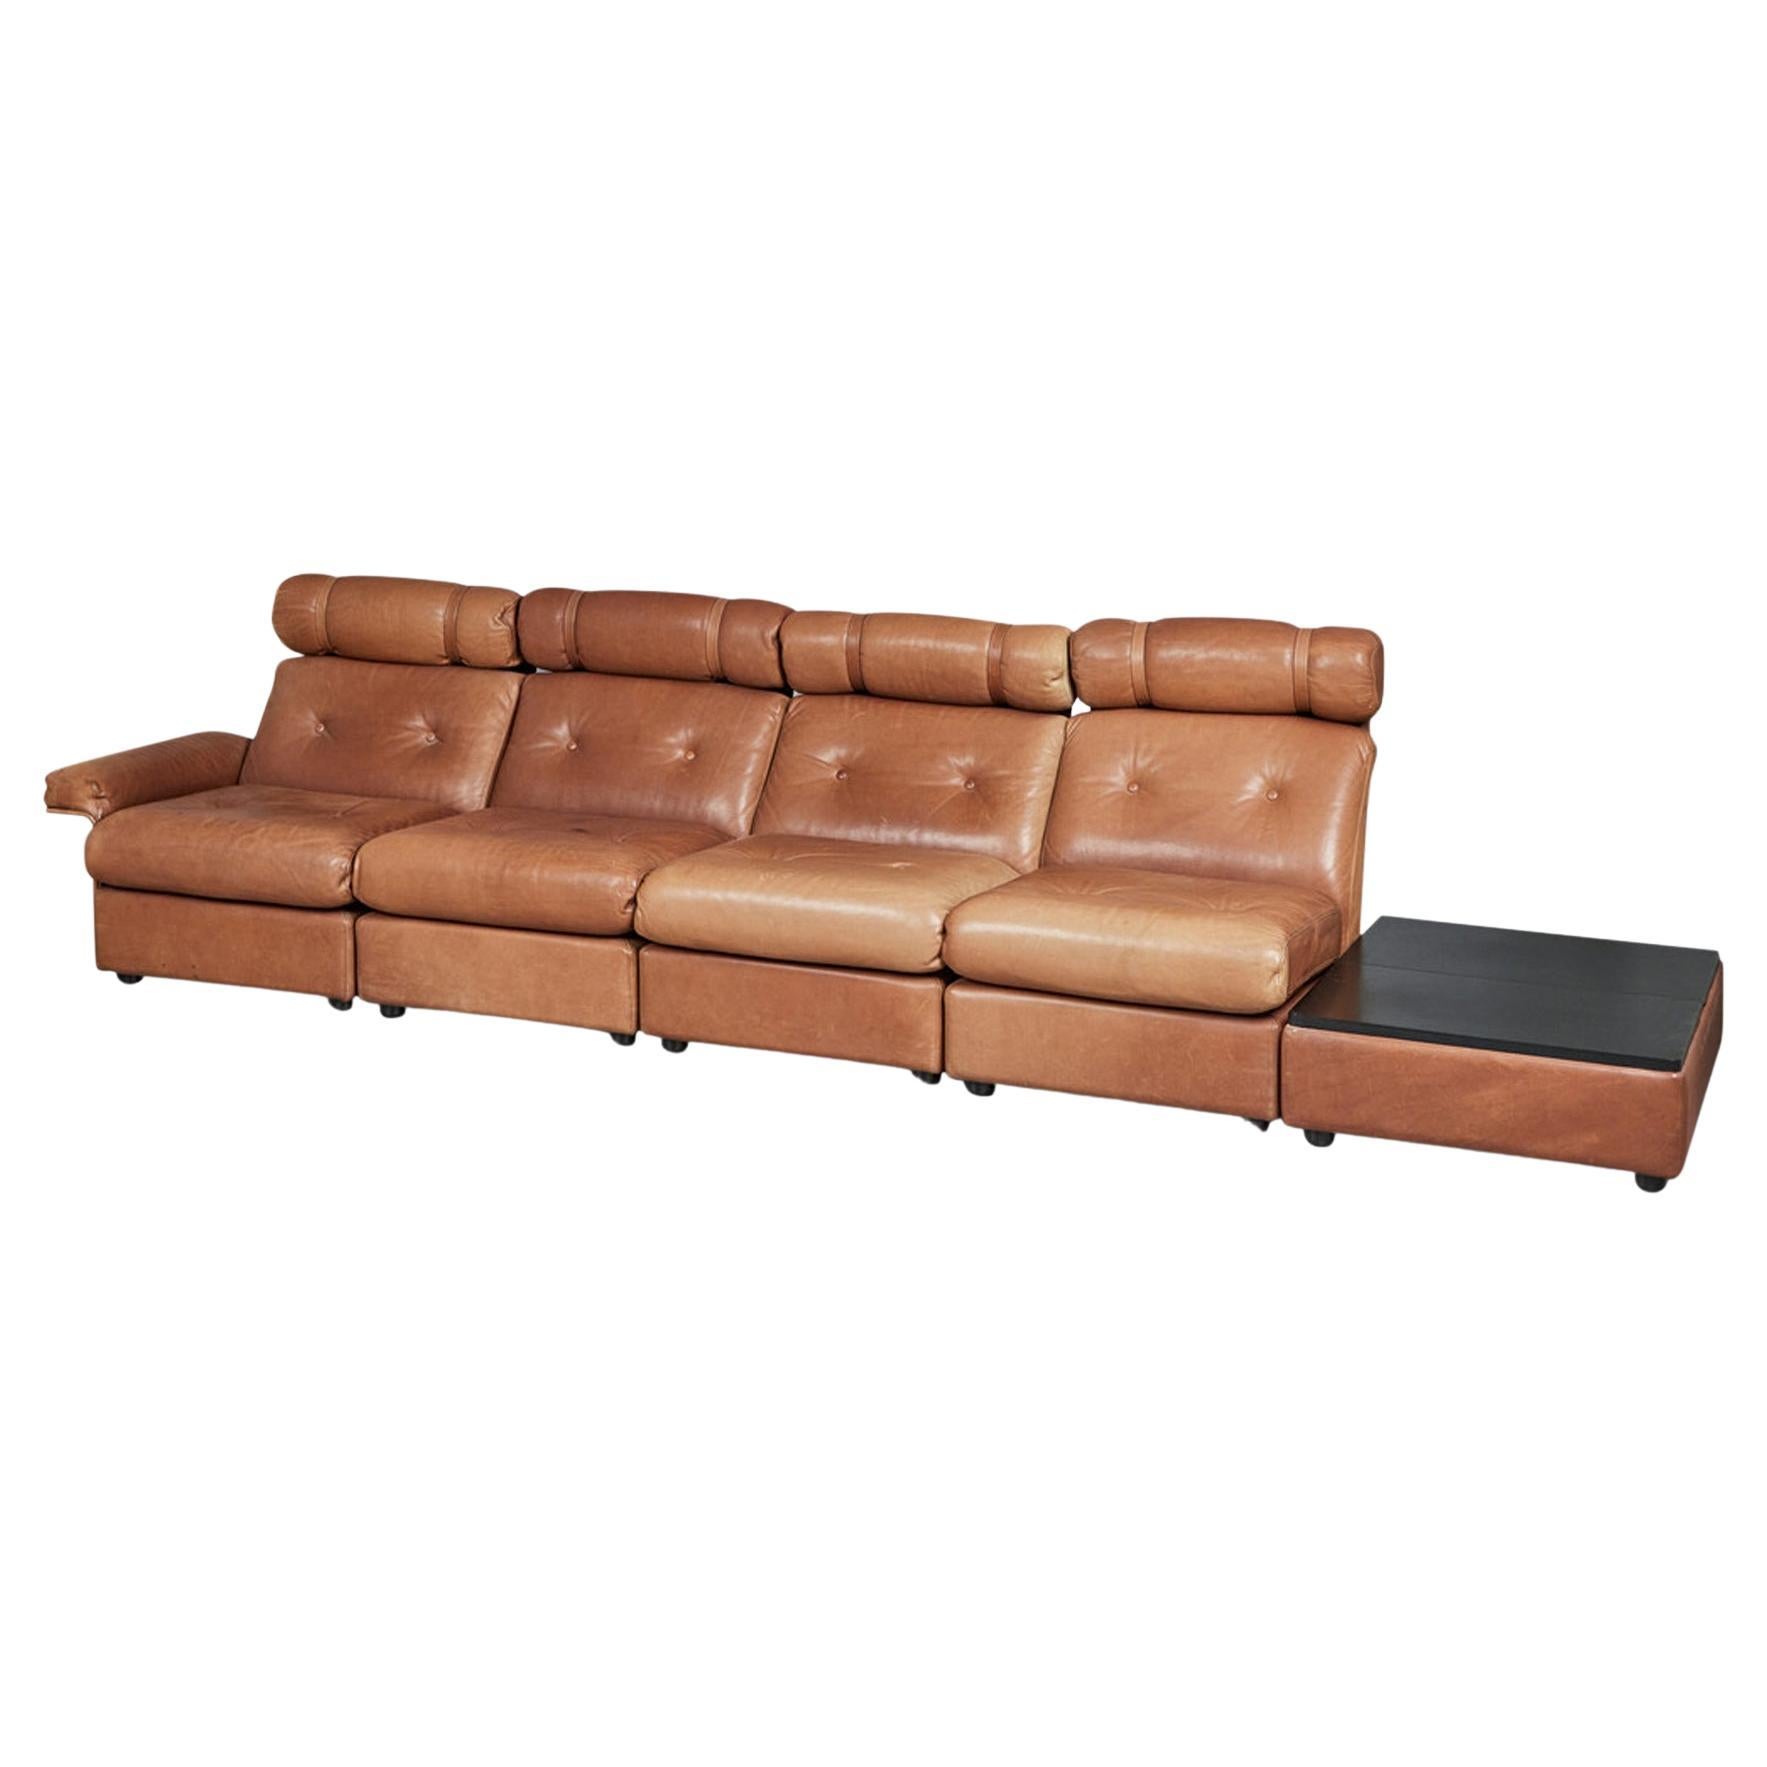 1970s Highback Leather Sectional Sofa in Cognac Buffalo Leather For Sale